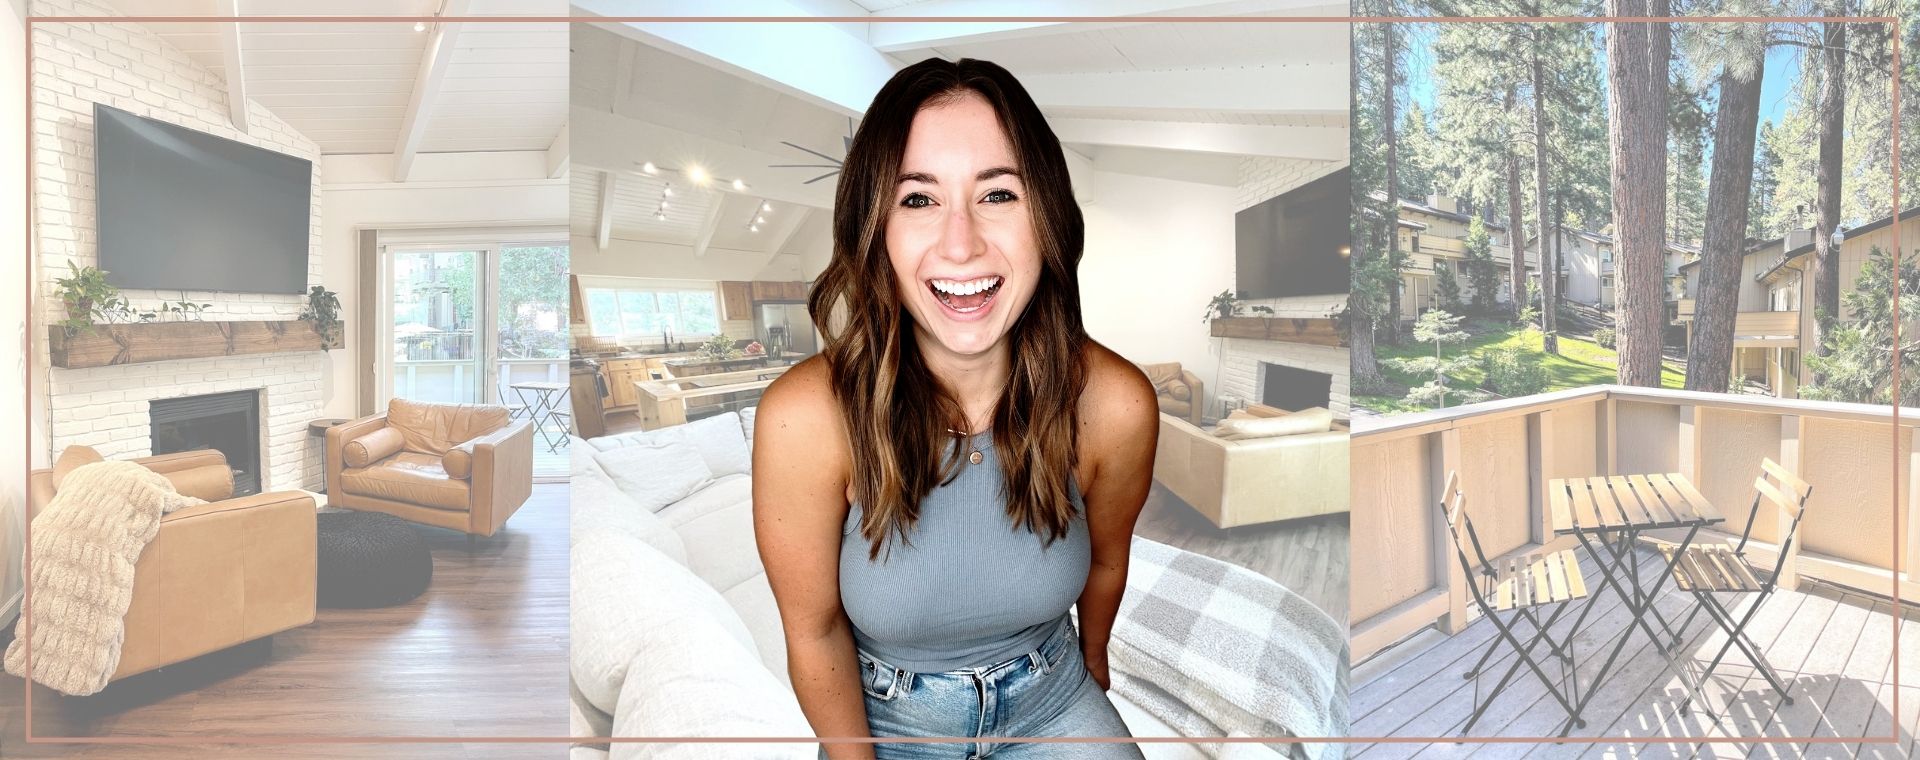 Read the truth about what to expect as a new airbnb host and get all my Airbnb hosting tips to successfully navigate your first month.